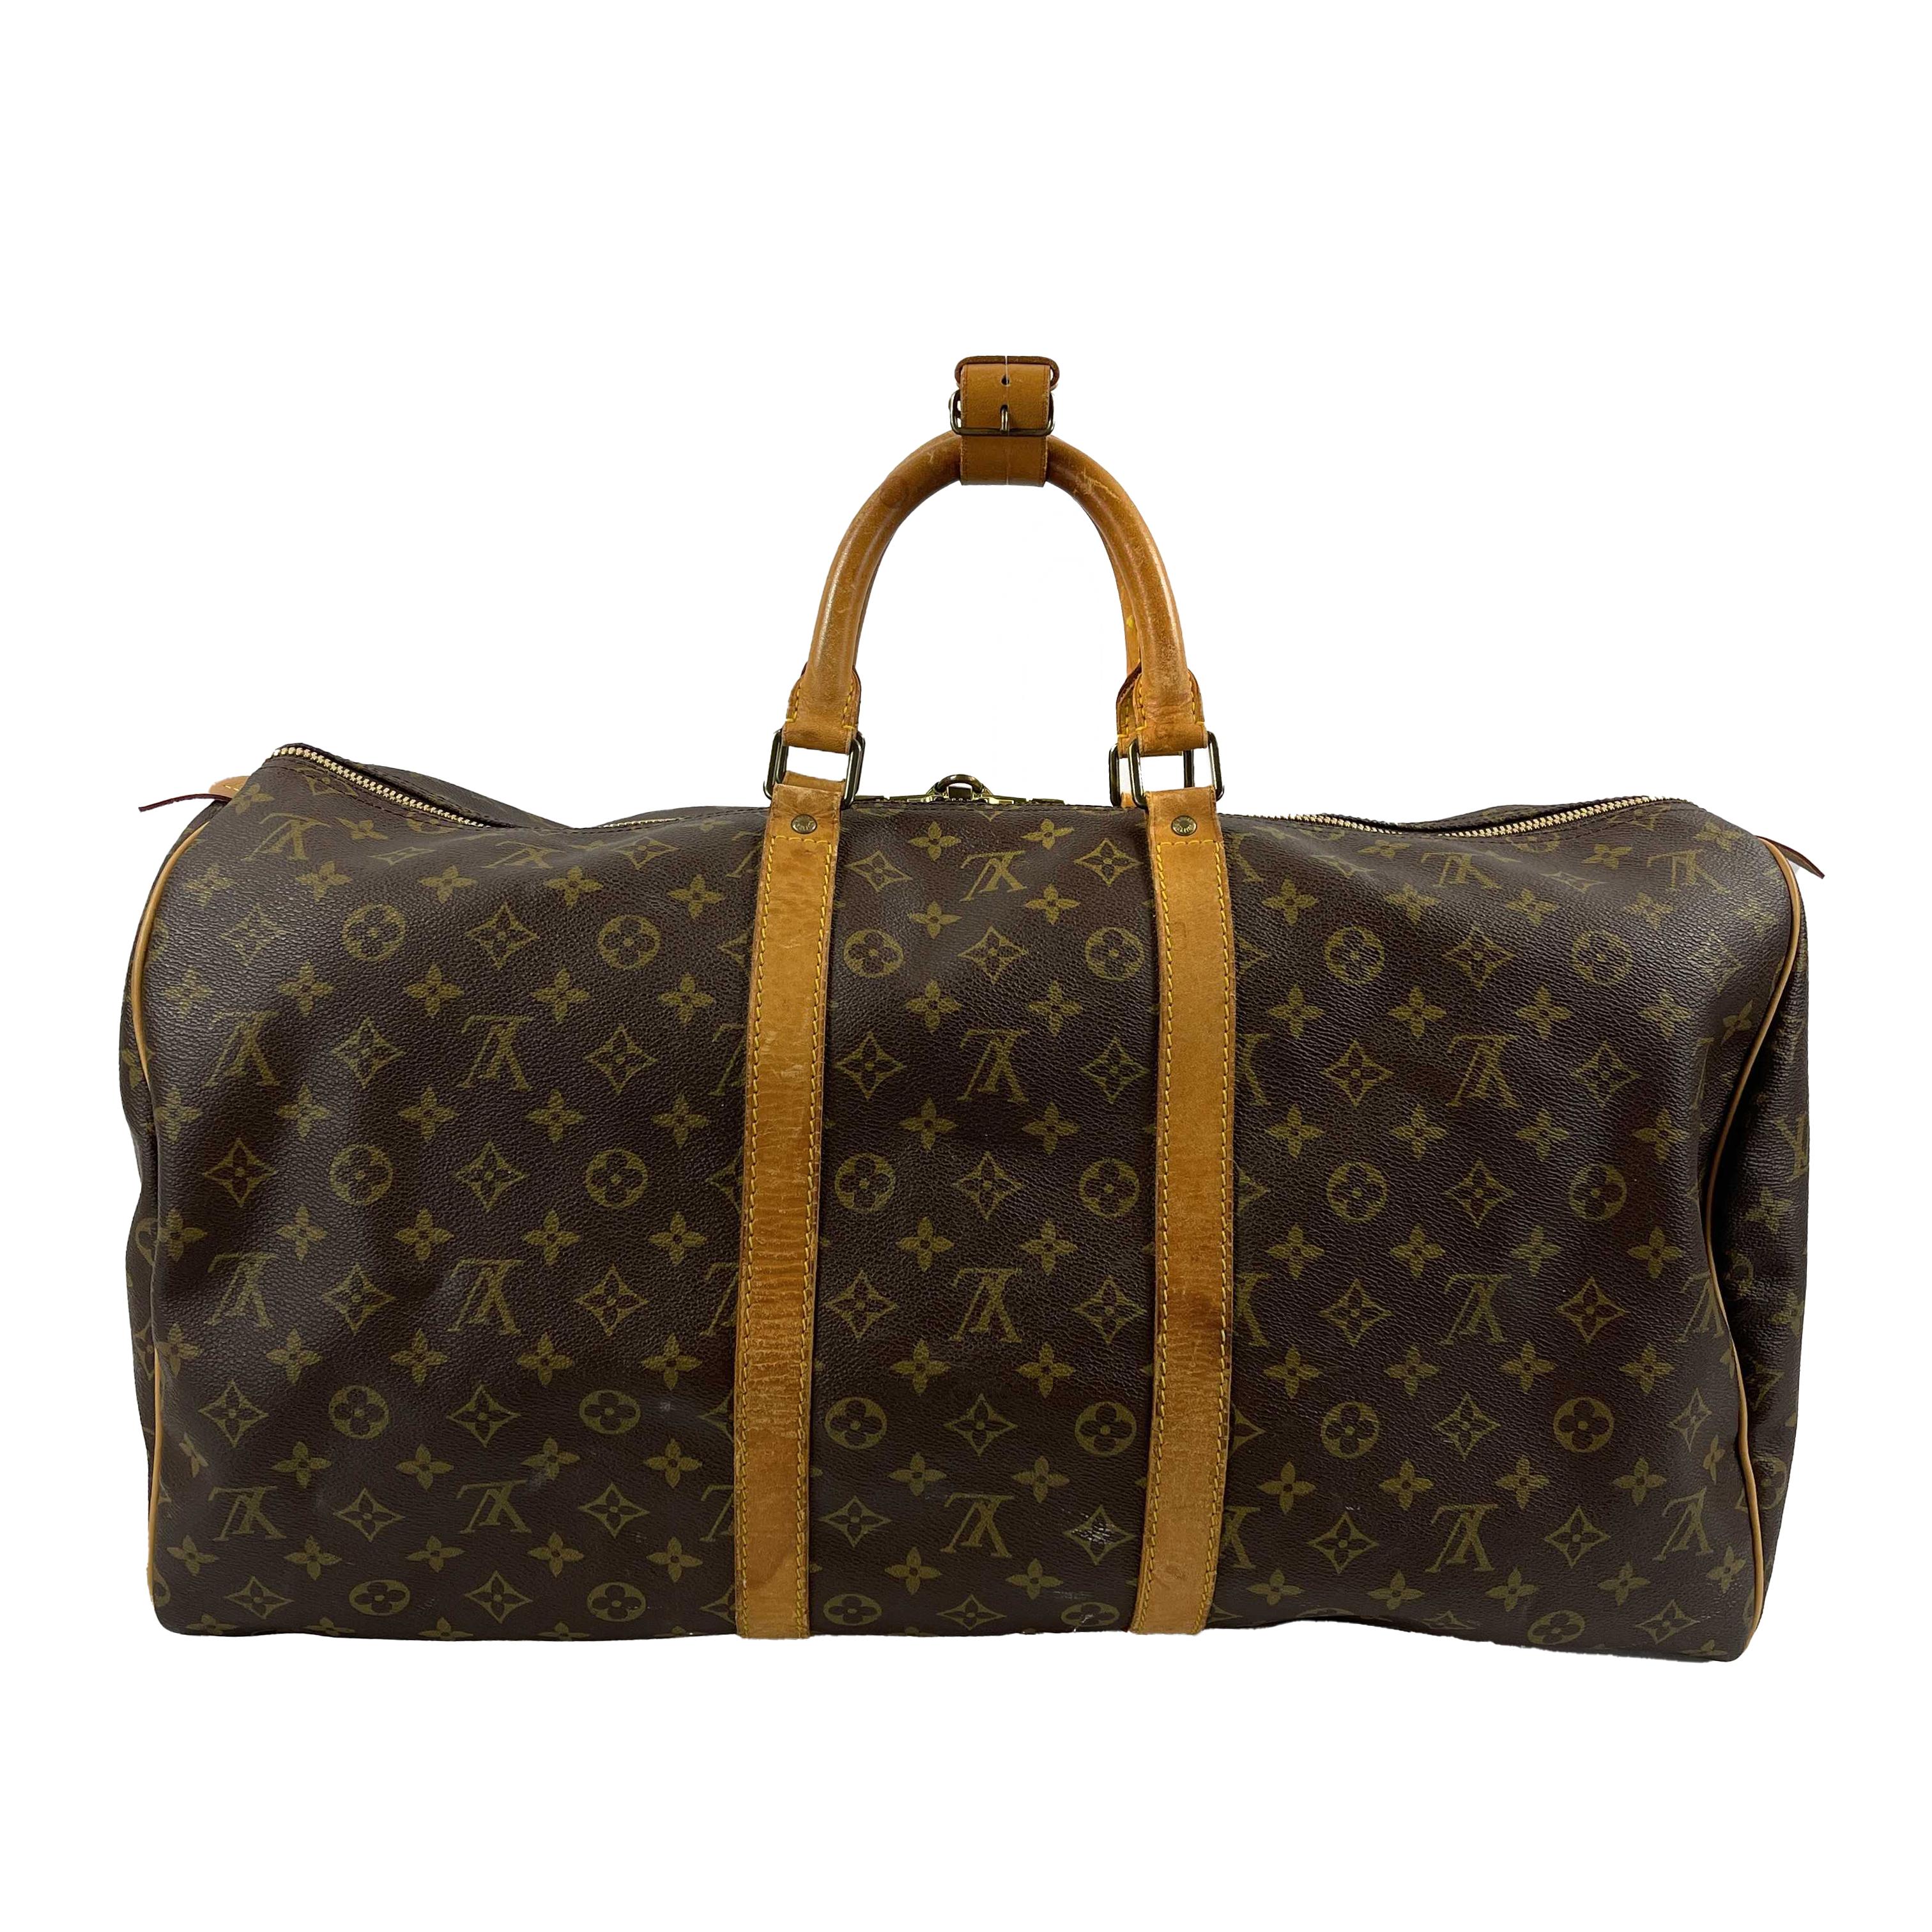 LV Louis Vuitton - VTG 1985 Brown Beige Monogram - Keepall 50 Large Duffle Bag 

Description

This vintage Louis Vuitton Keepall 50 duffle bag was manufactured in February 1985 (date code: 852 SD).
It is crafted with the iconic brown and beige LV